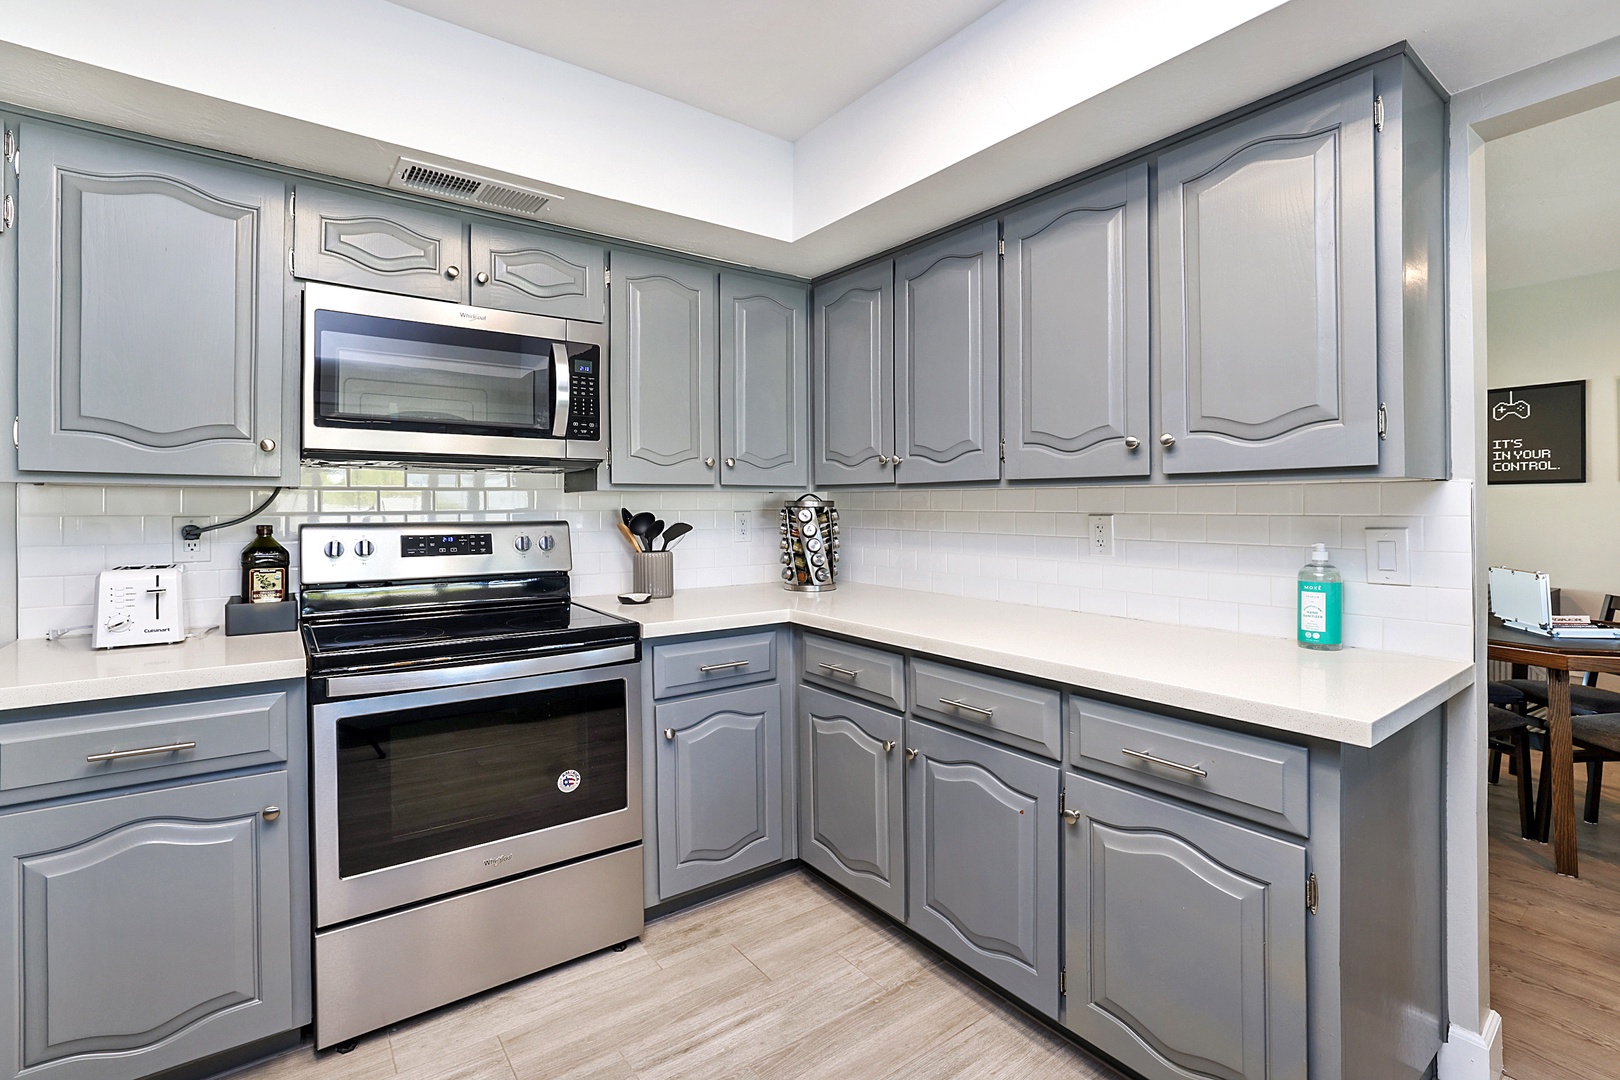 modern stainless steel appliances including: dishwasher, fridge, oven, microwave, stove top, coffee maker, pots and pans, and utensils.